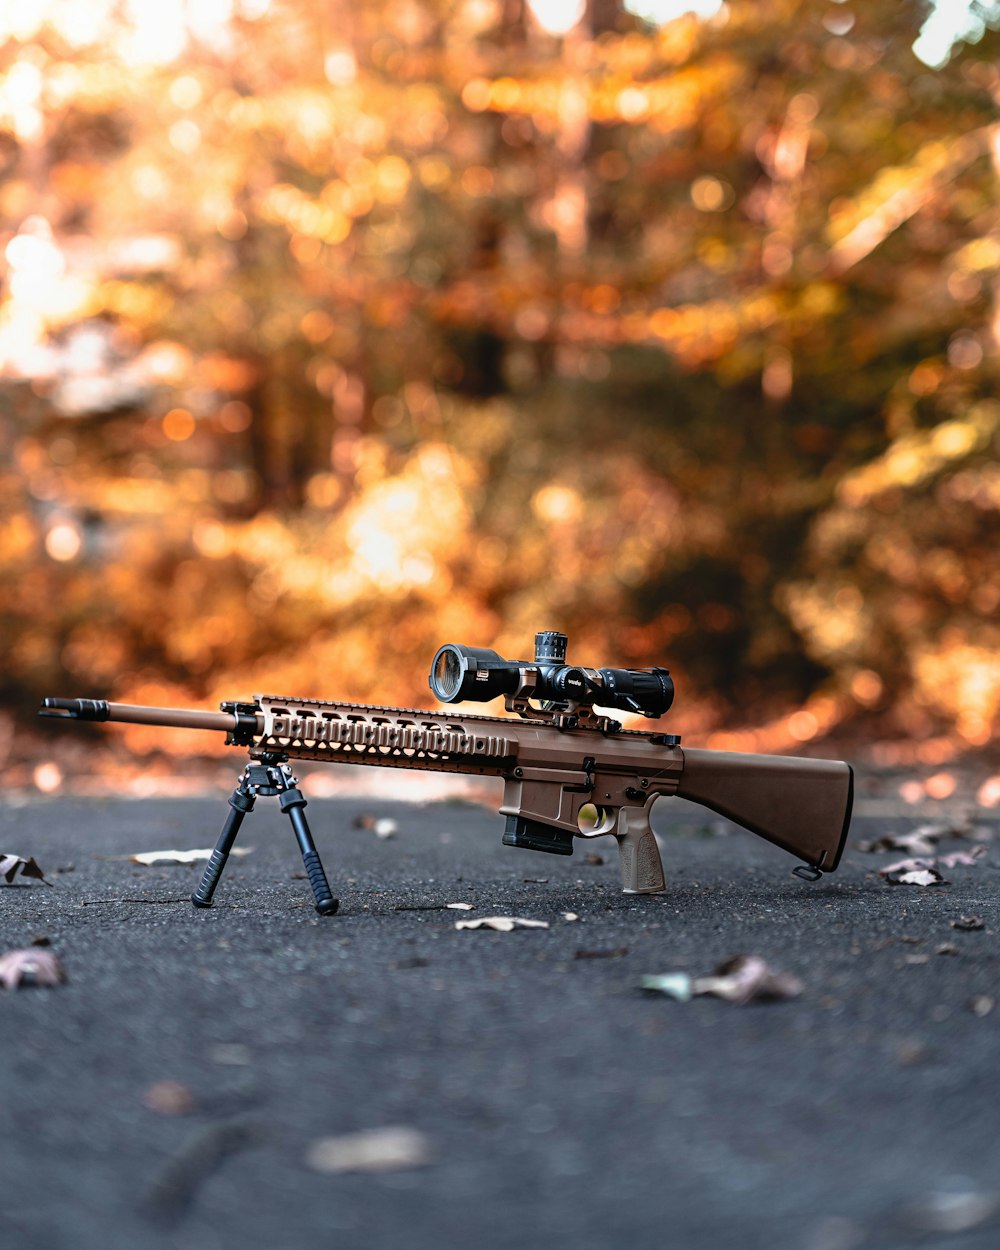 a rifle on the ground with a scope on it